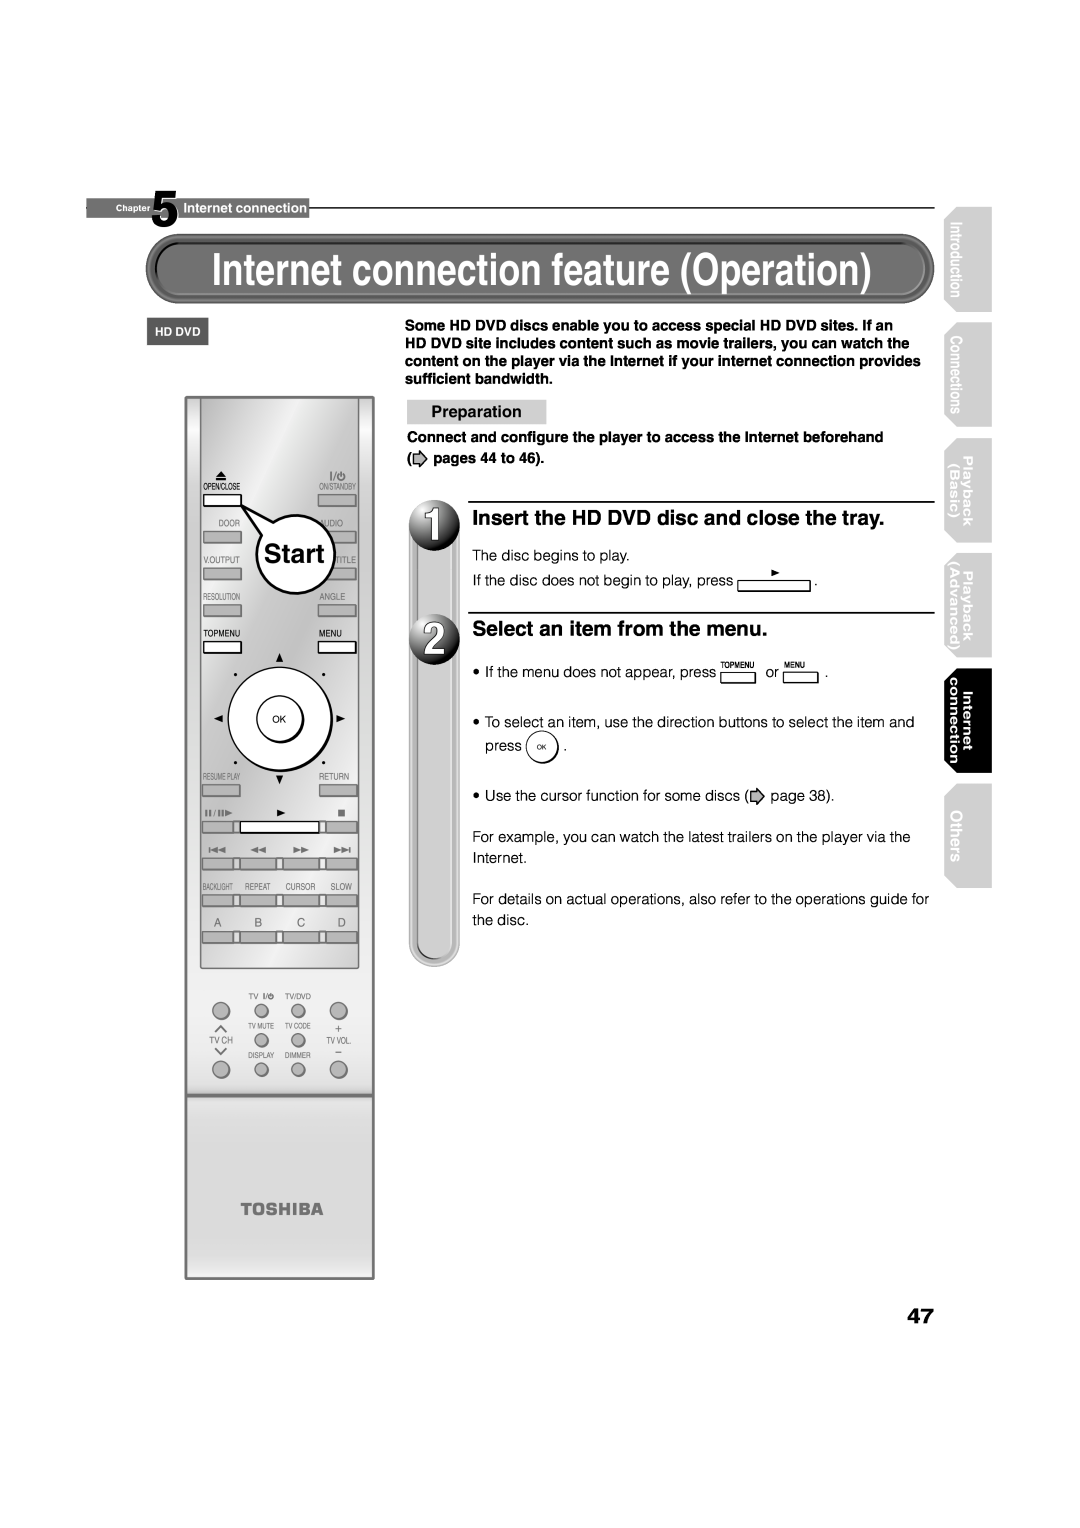 Toshiba hd-xa1kn Internet connection feature Operation, Select an item from the menu, Start, Basic, Playback, Others 